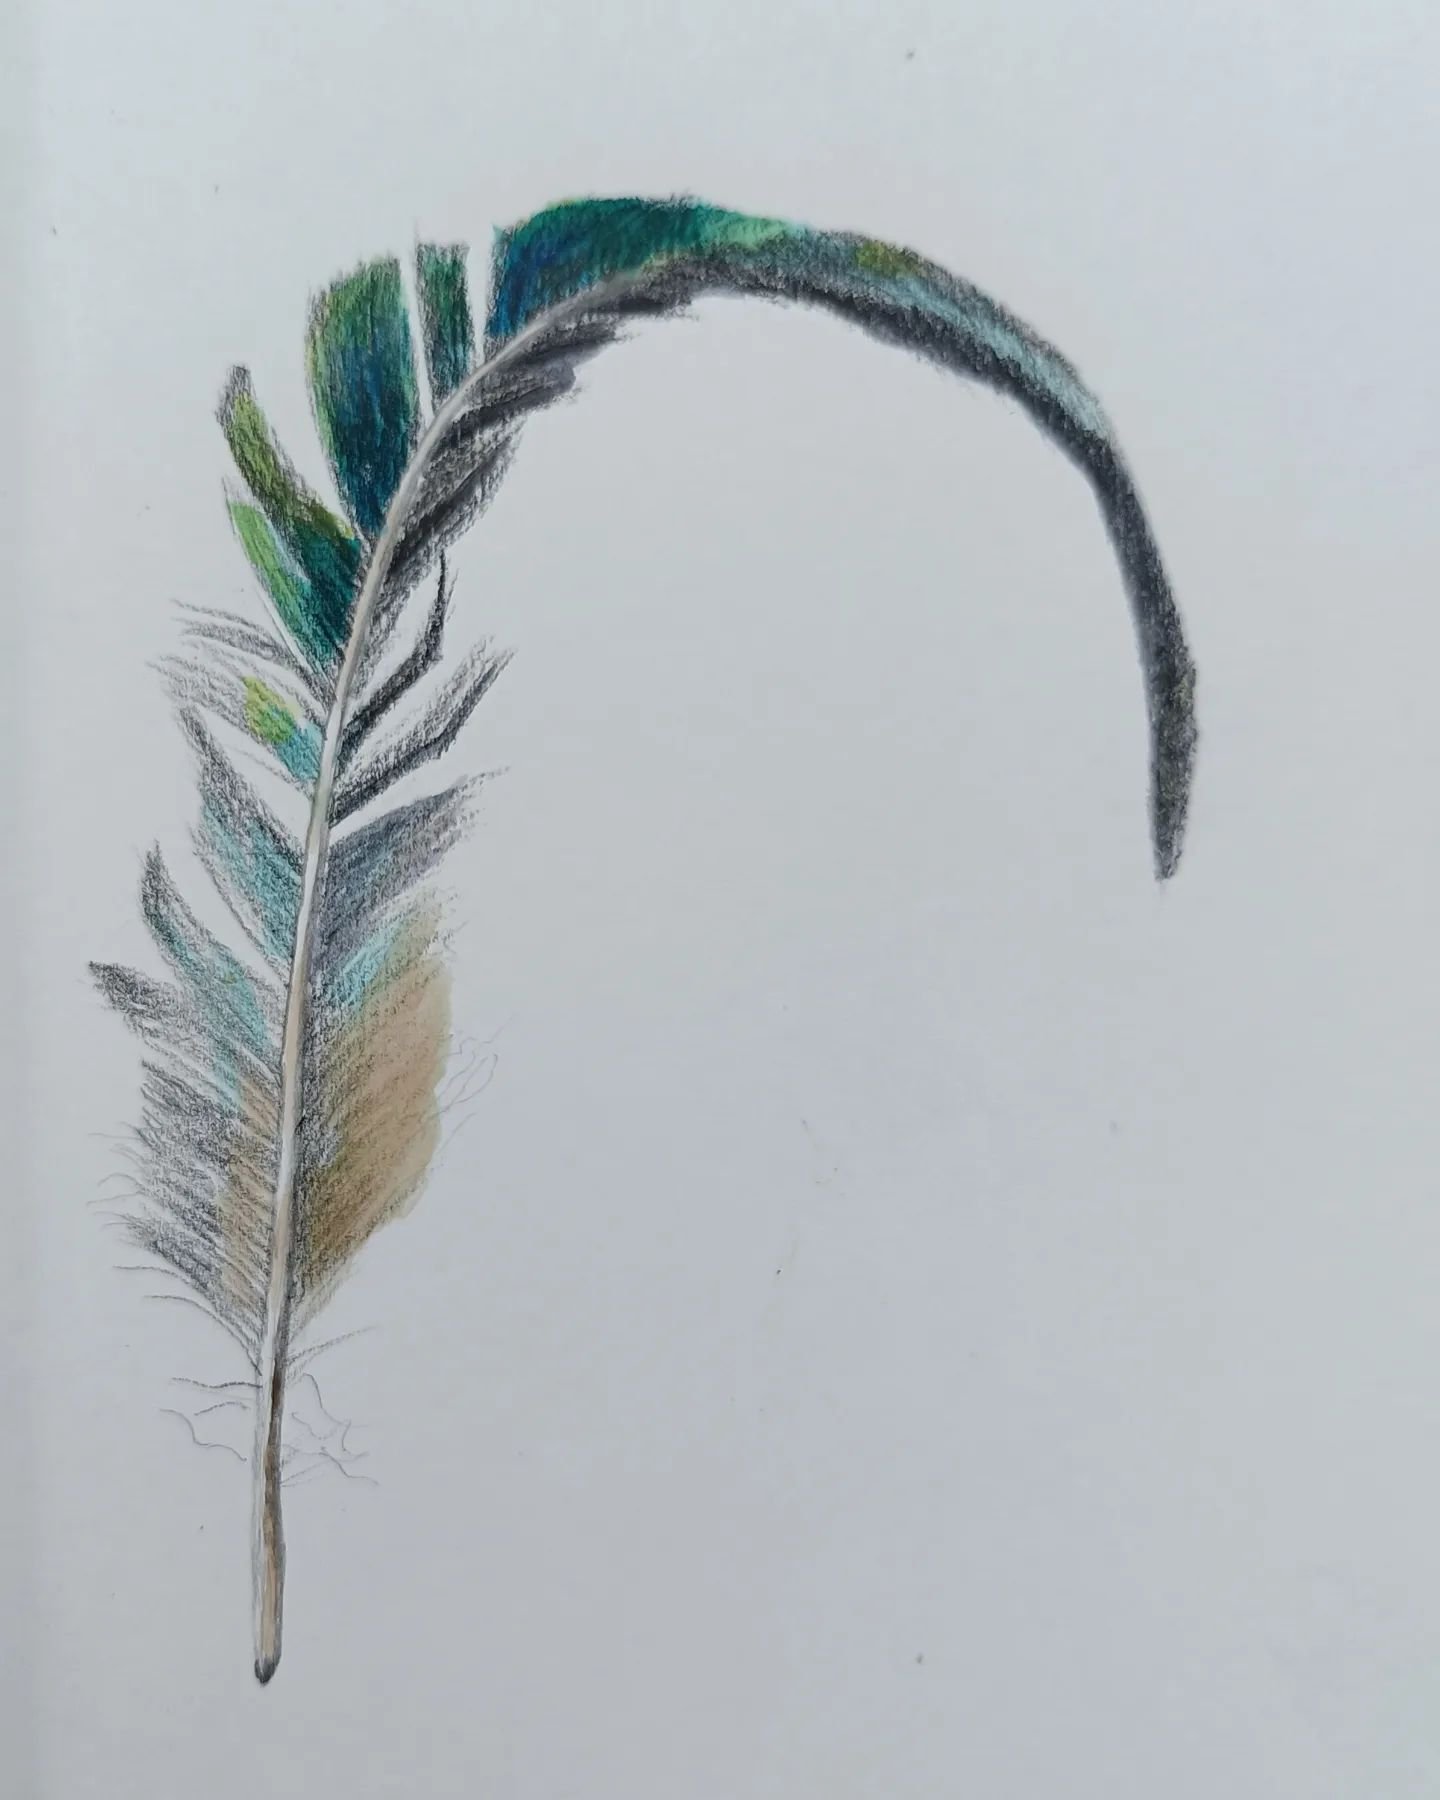 DAY 84 #the100dayproject Tail Feather 
Lumocolor permanent, graphite pencil, watercolour.
I've had a suggestion to do something extra with these drawings. What do you think?